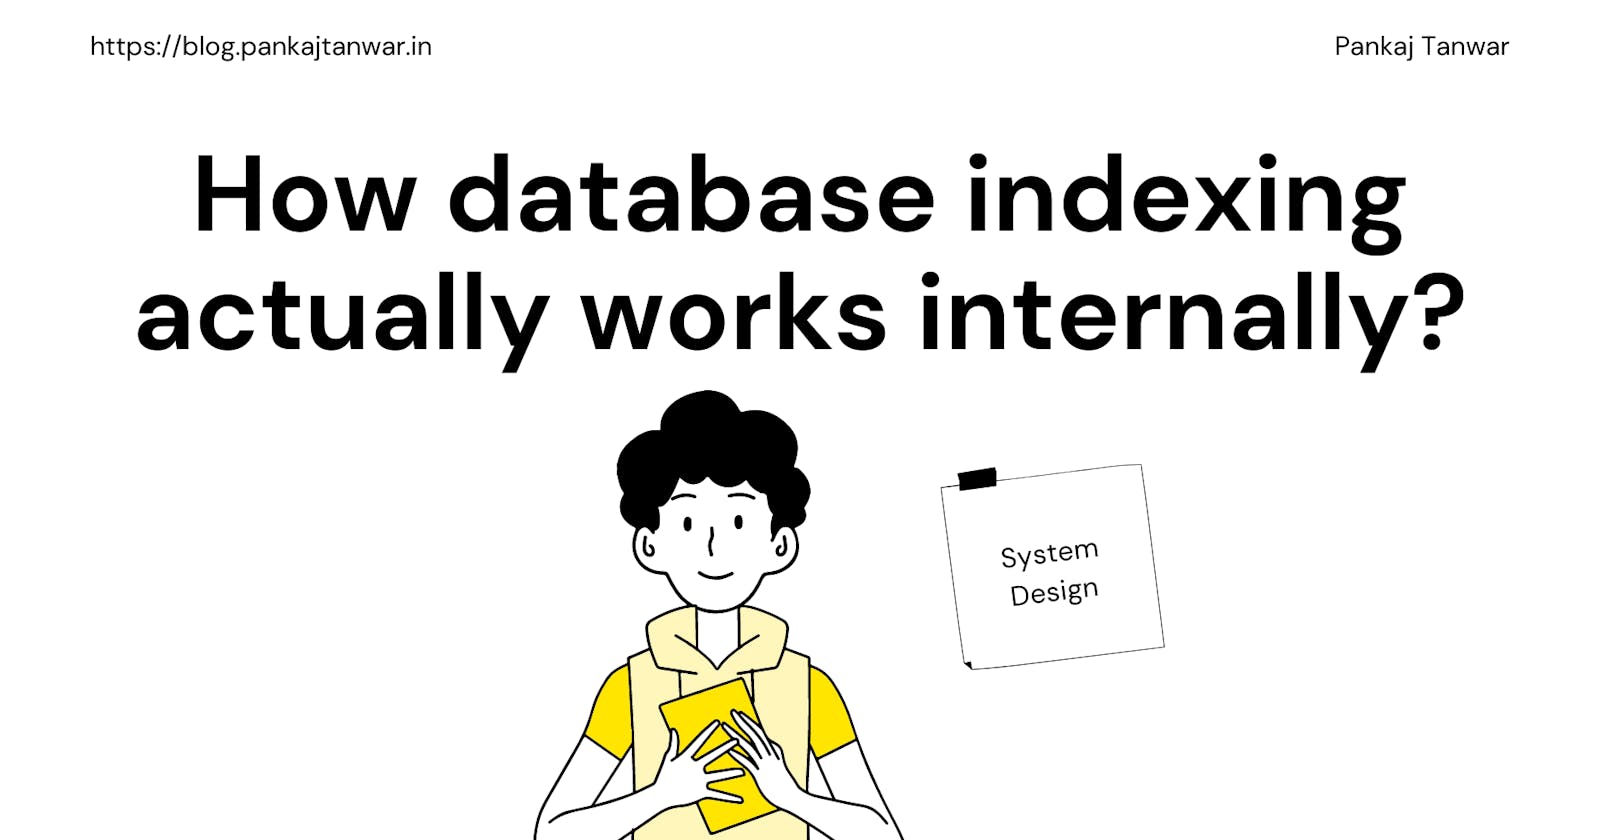 How database indexing actually works internally?